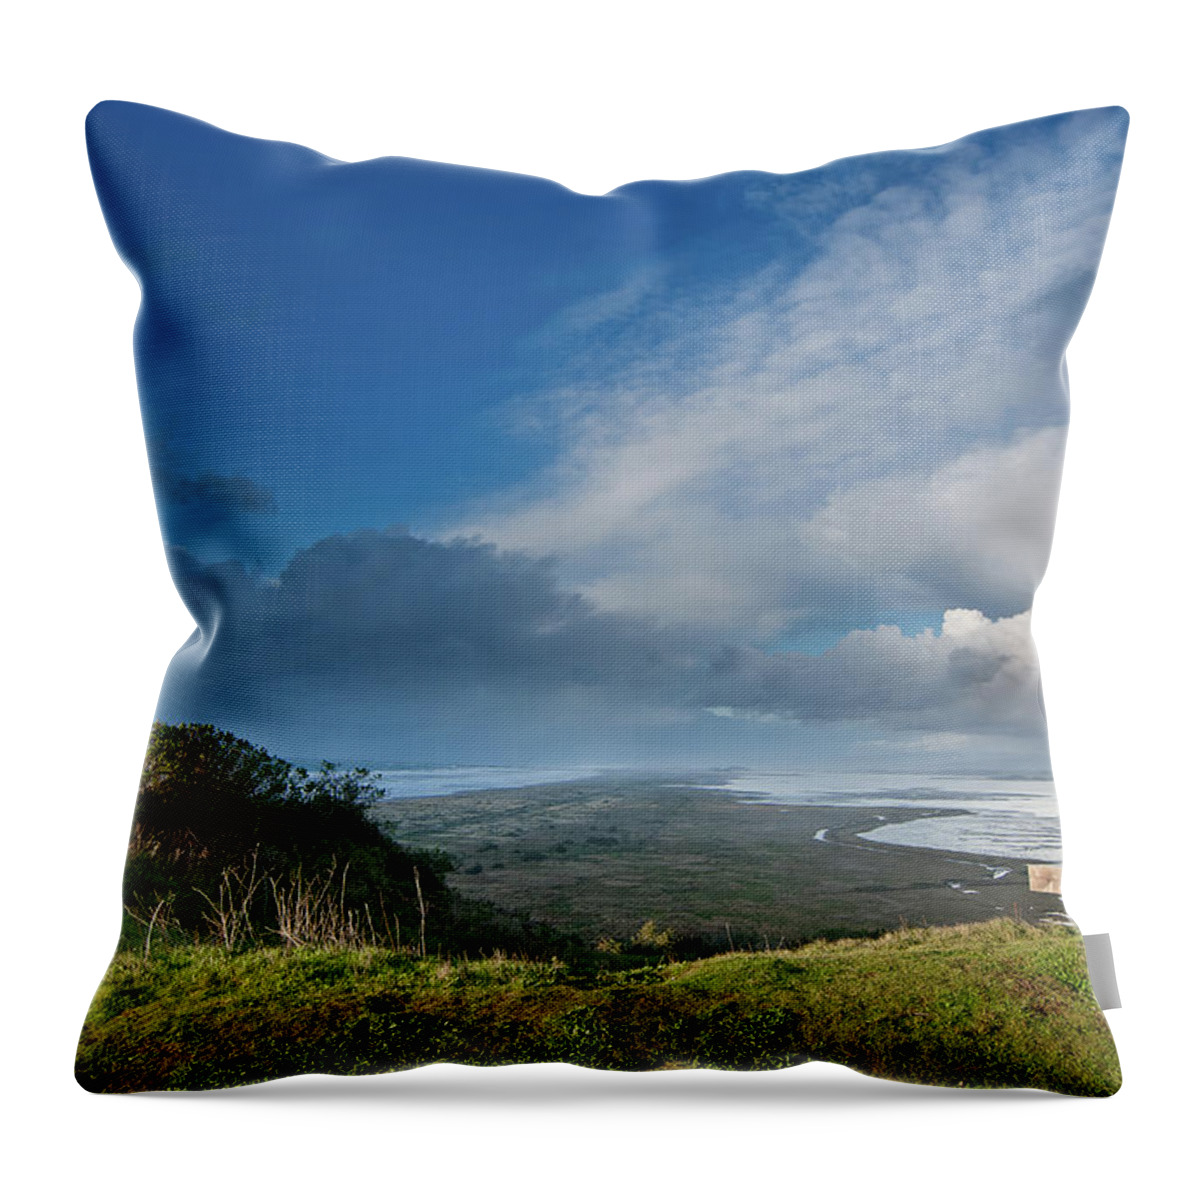 Landscape Throw Pillow featuring the photograph Humboldt Views by Greg Nyquist